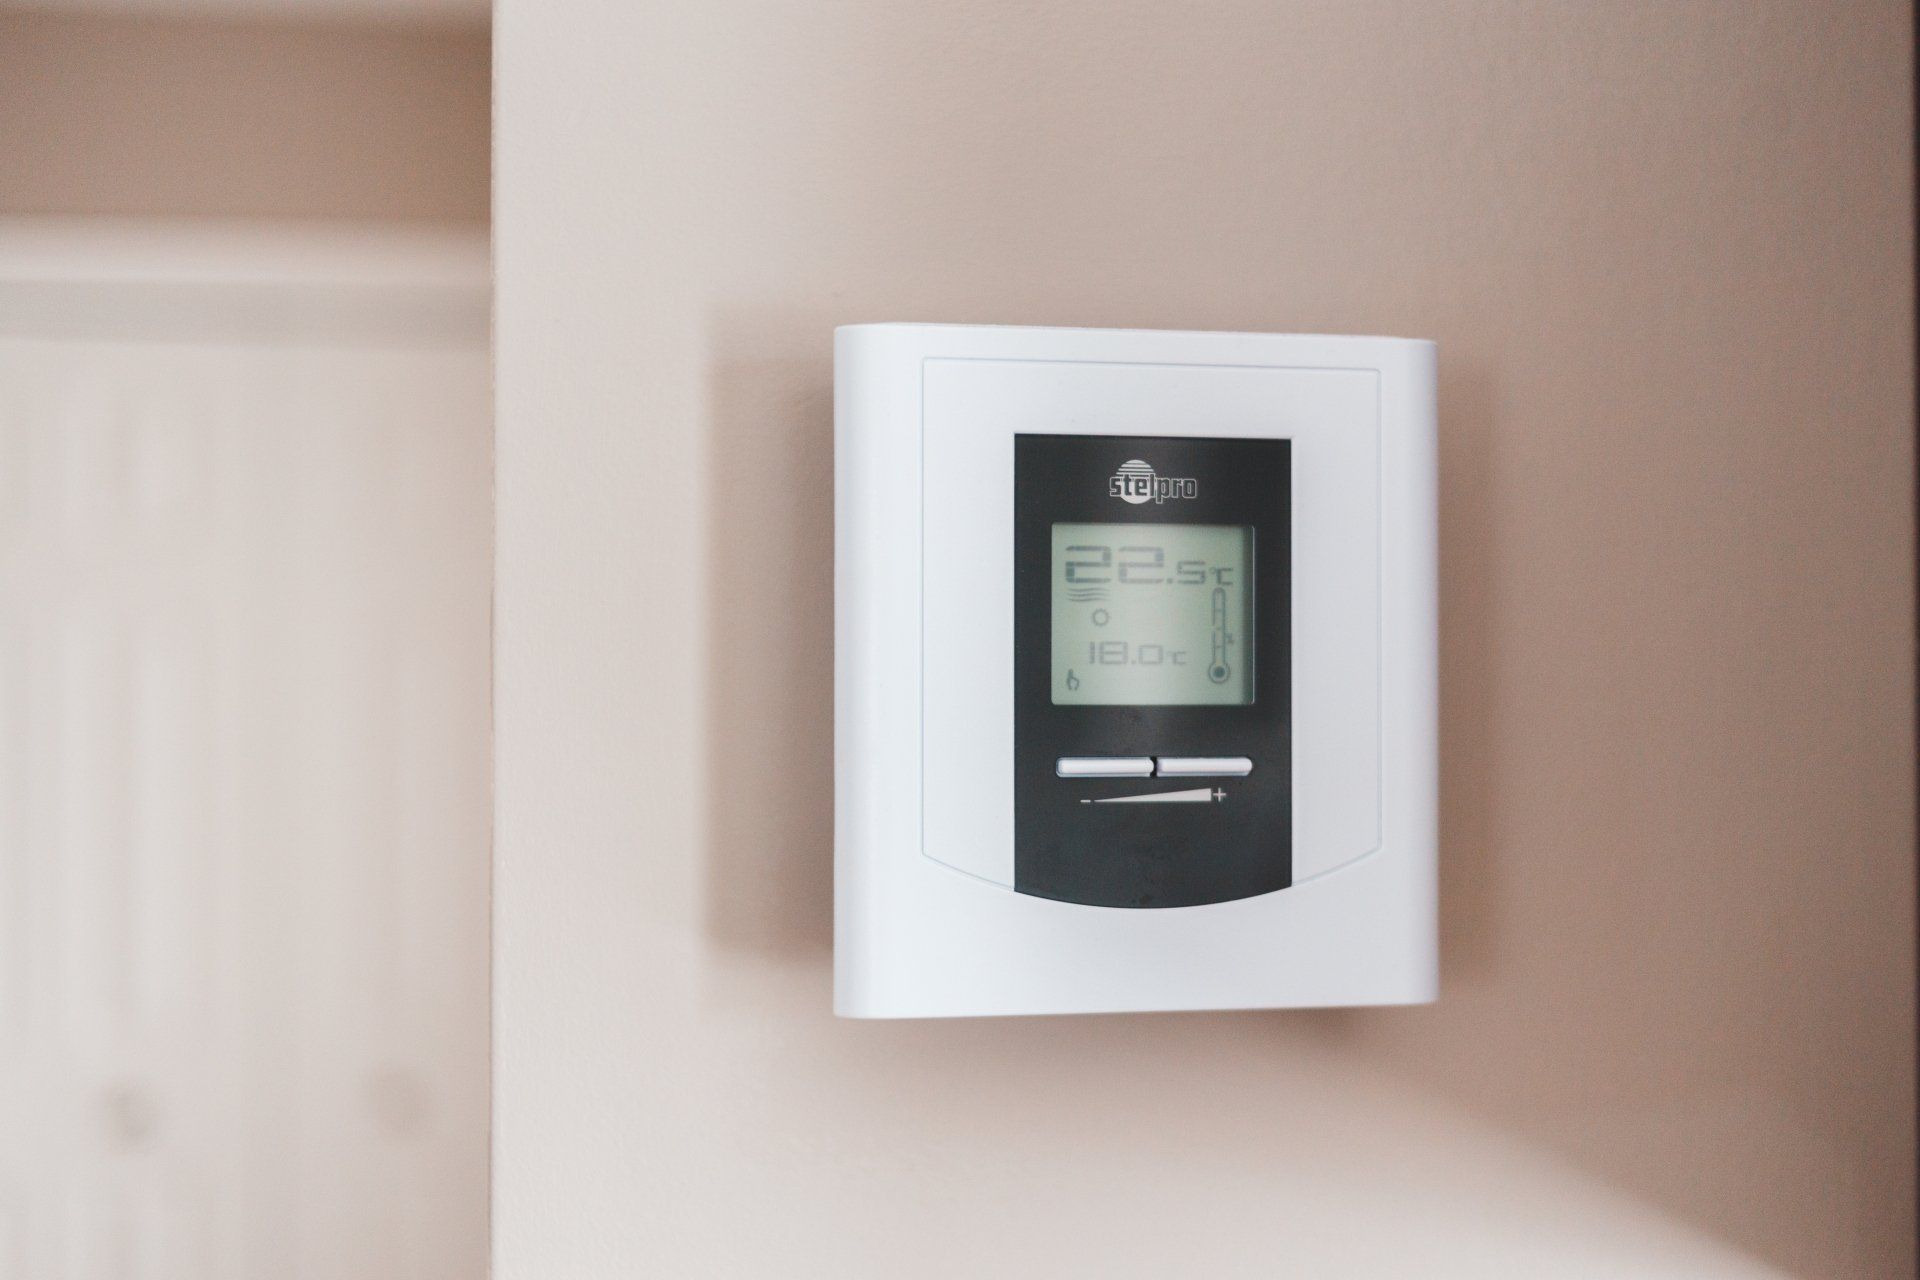 A stetpro thermostat on an off-white wall